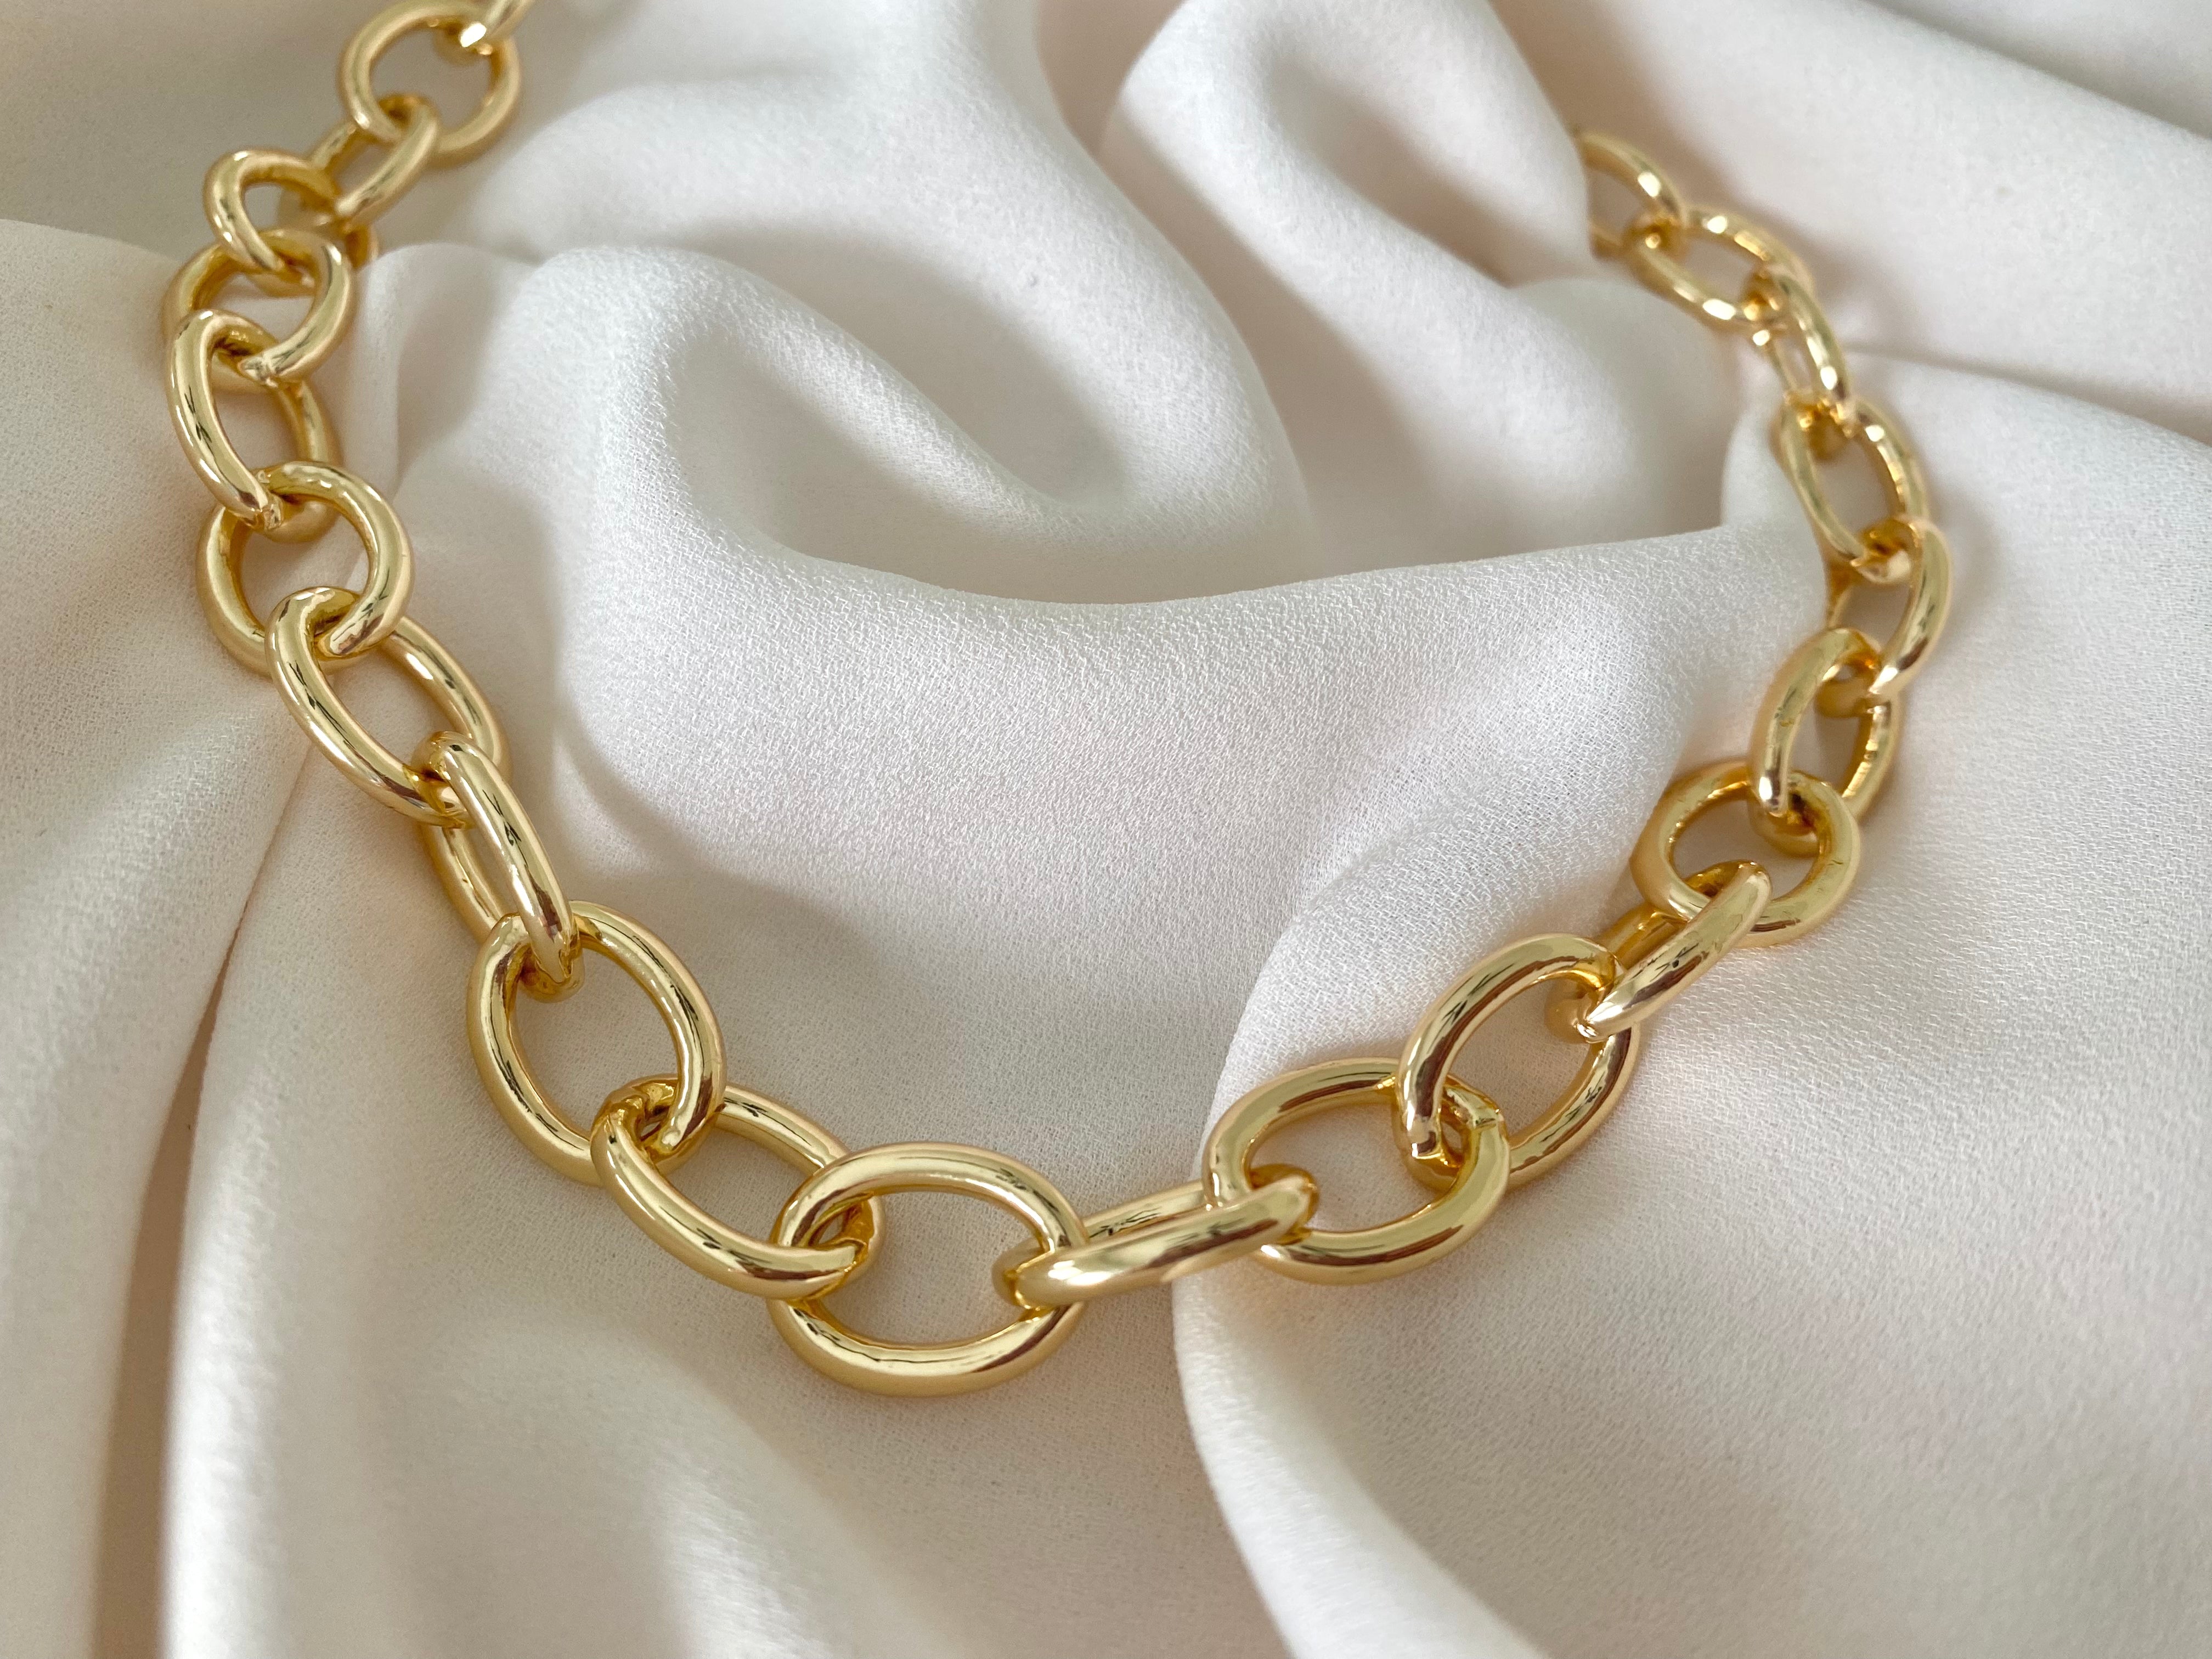 Gold Filled Chunky Oval Link Chain Necklace - Statement Necklace